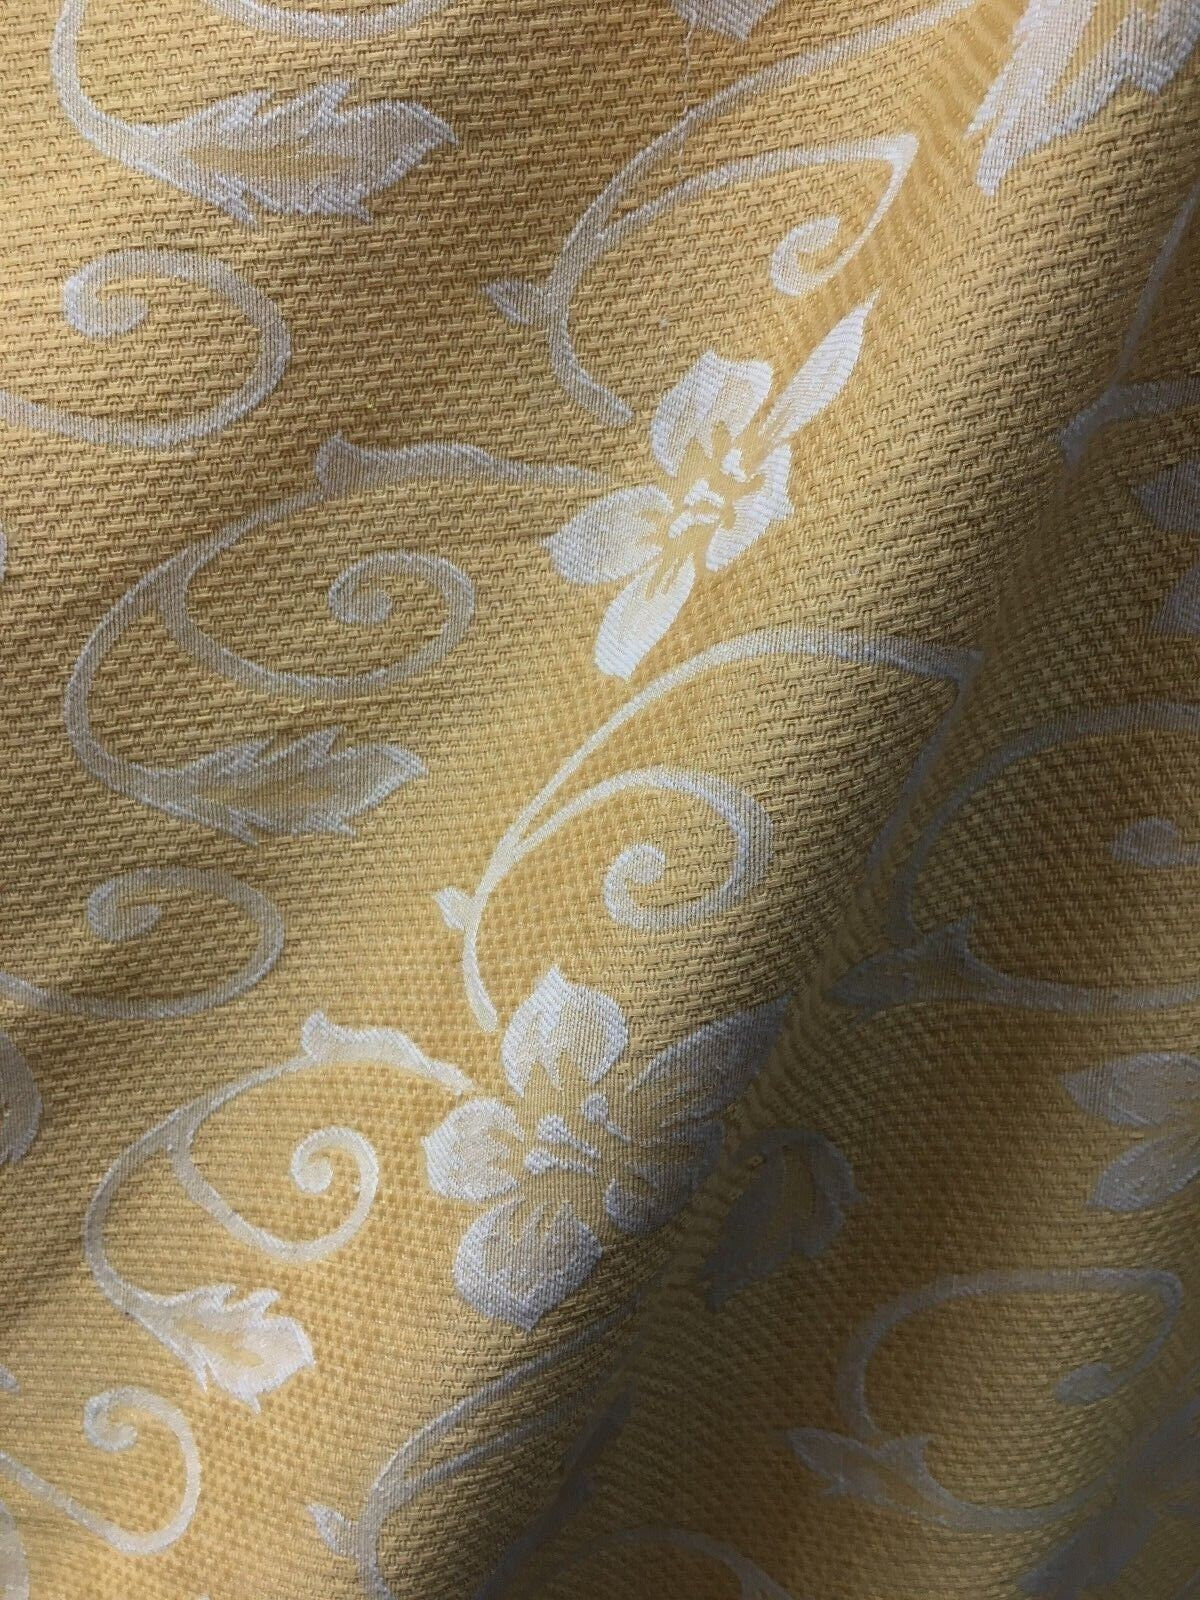 ORANGE GOLD Floral Upholstery Brocade Fabric (54 in.) Sold By The Yard